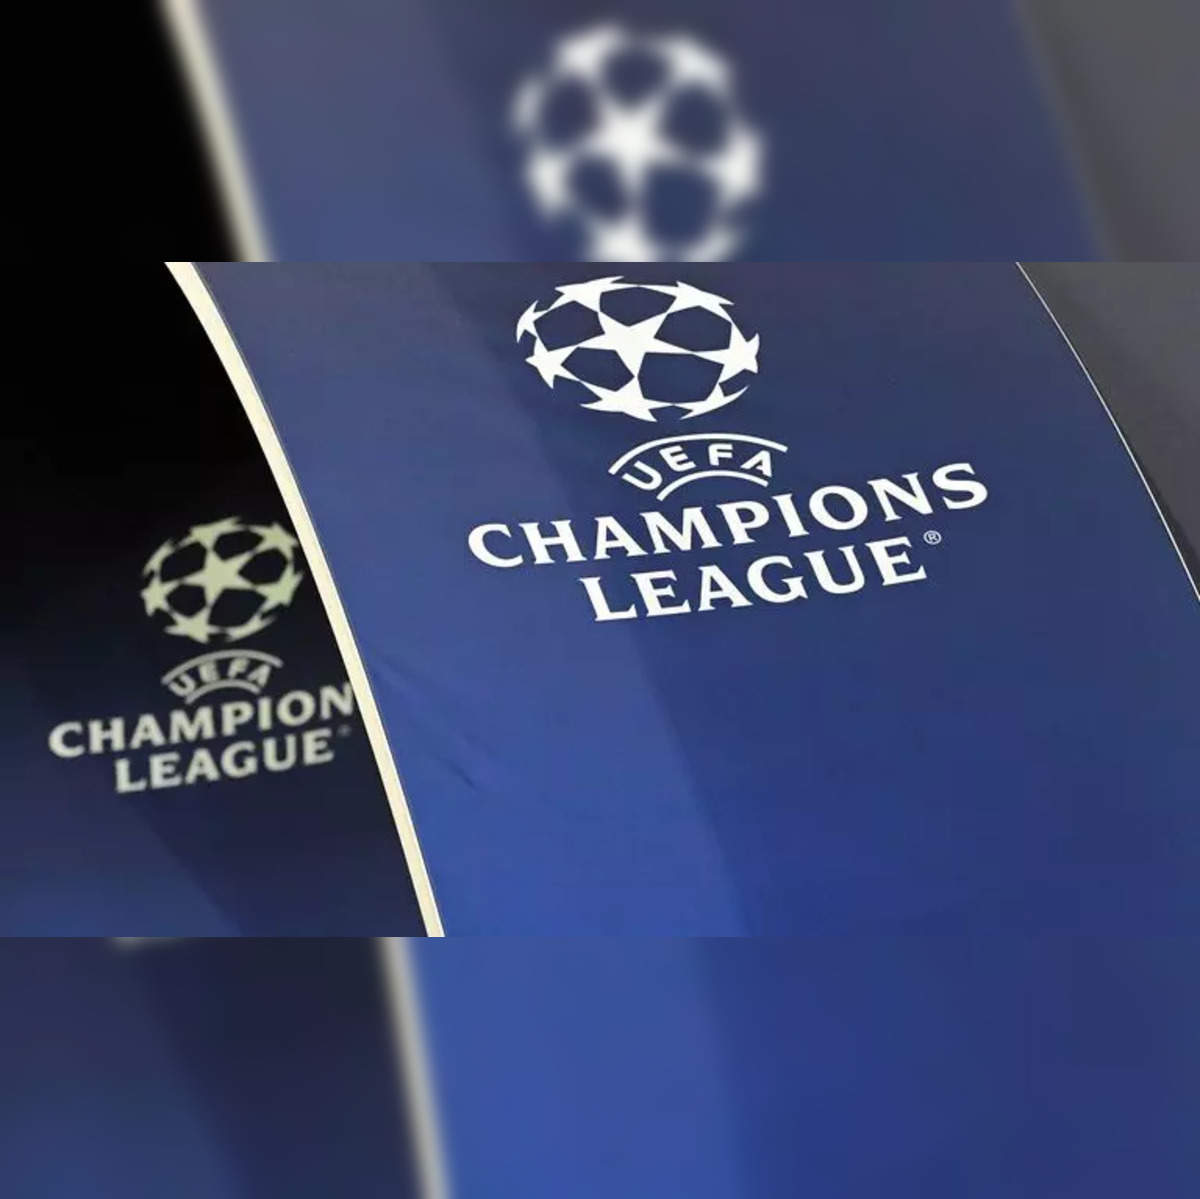 UEFA Champions League Schedule: Watch Live Matches On Paramount+